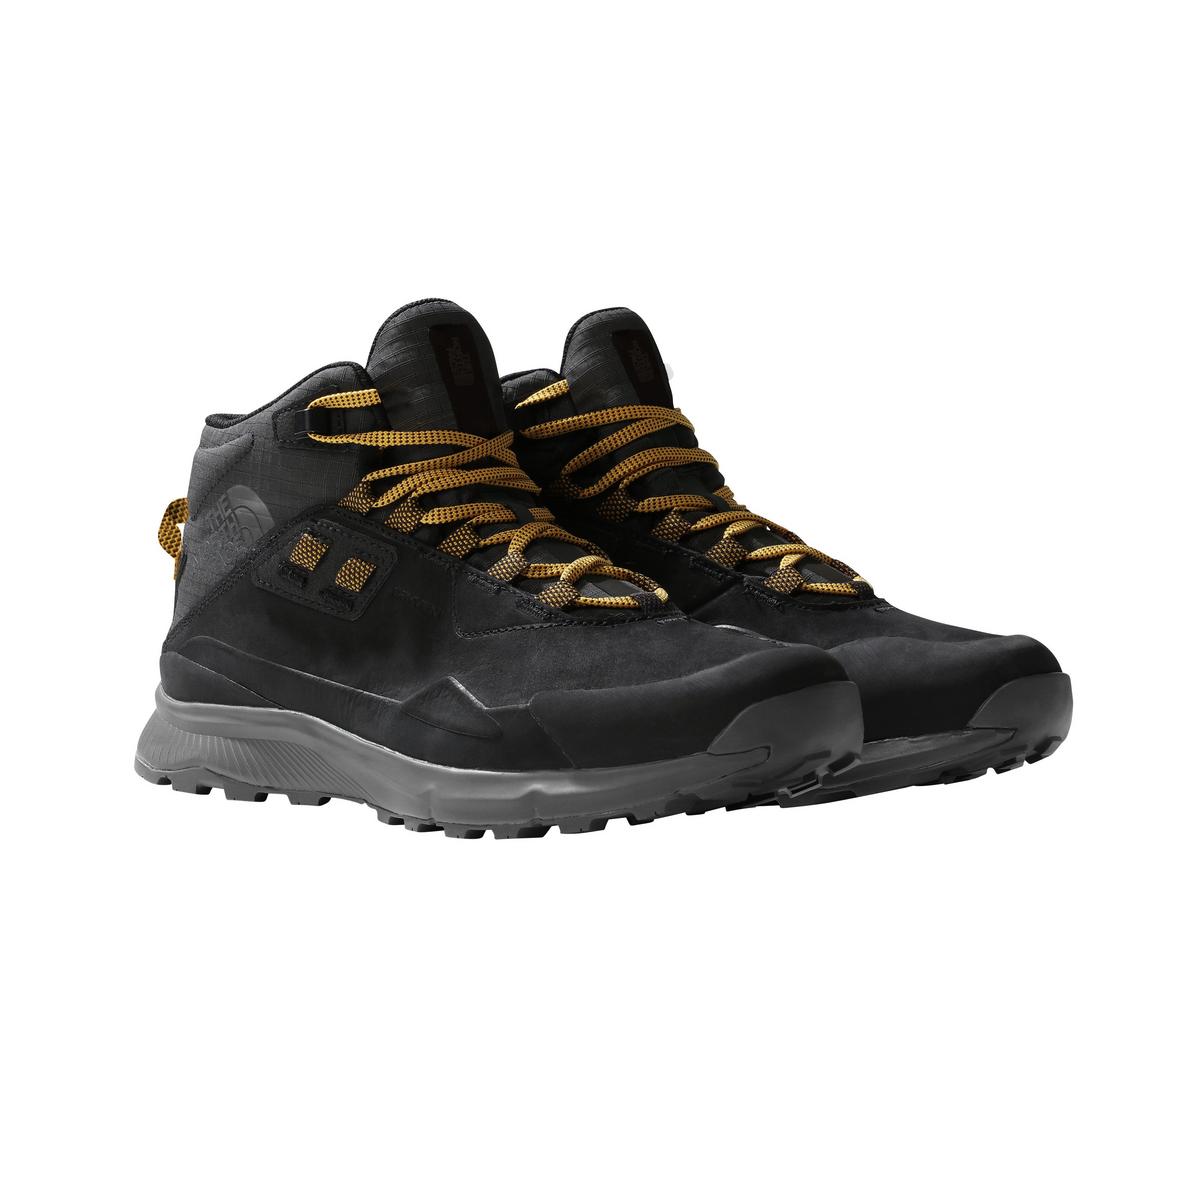 The North Face Men's Cragstone Leather Waterproof Hiking Boots - Black